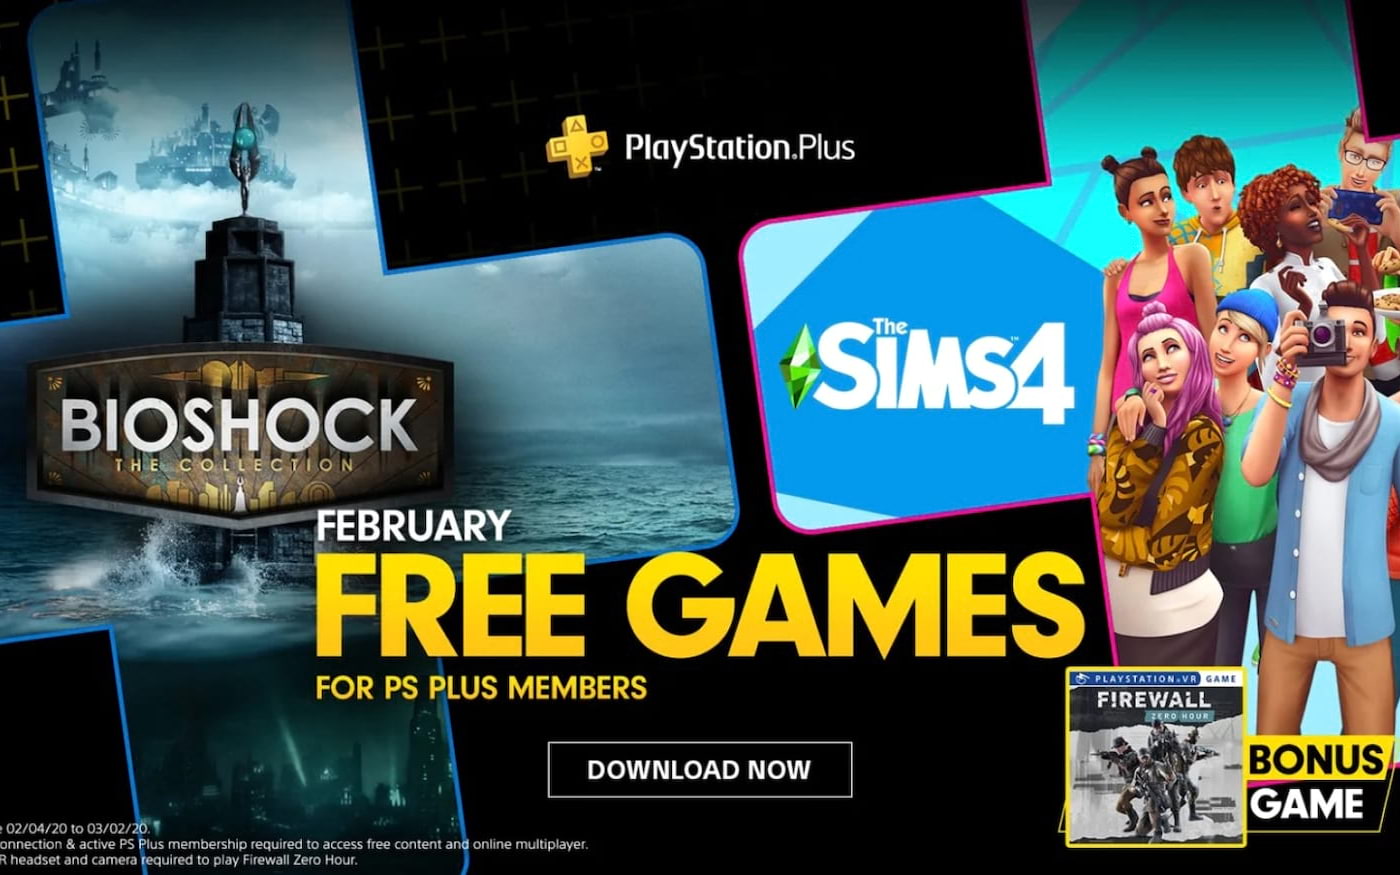 Check out the 3 FREE games on Playstation (PS) Plus in February!